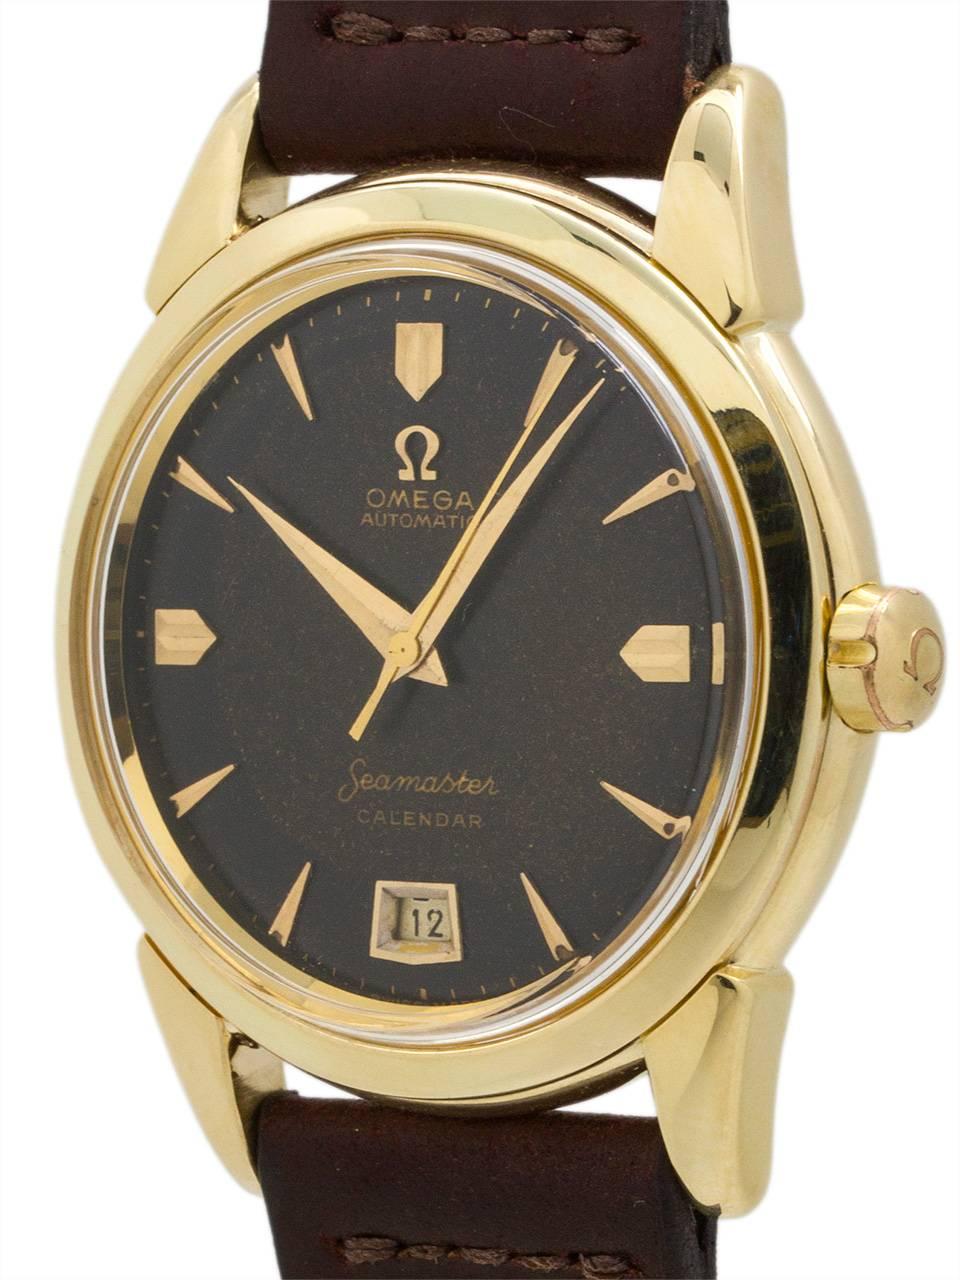 Omega 14K yellow gold automatic Seamaster Calendar with heavy screw back case and large contoured lugs. With great looking original patina’d black dial turning chocolate. With gold applied faceted indexes and large tapered sword hands. Powered by